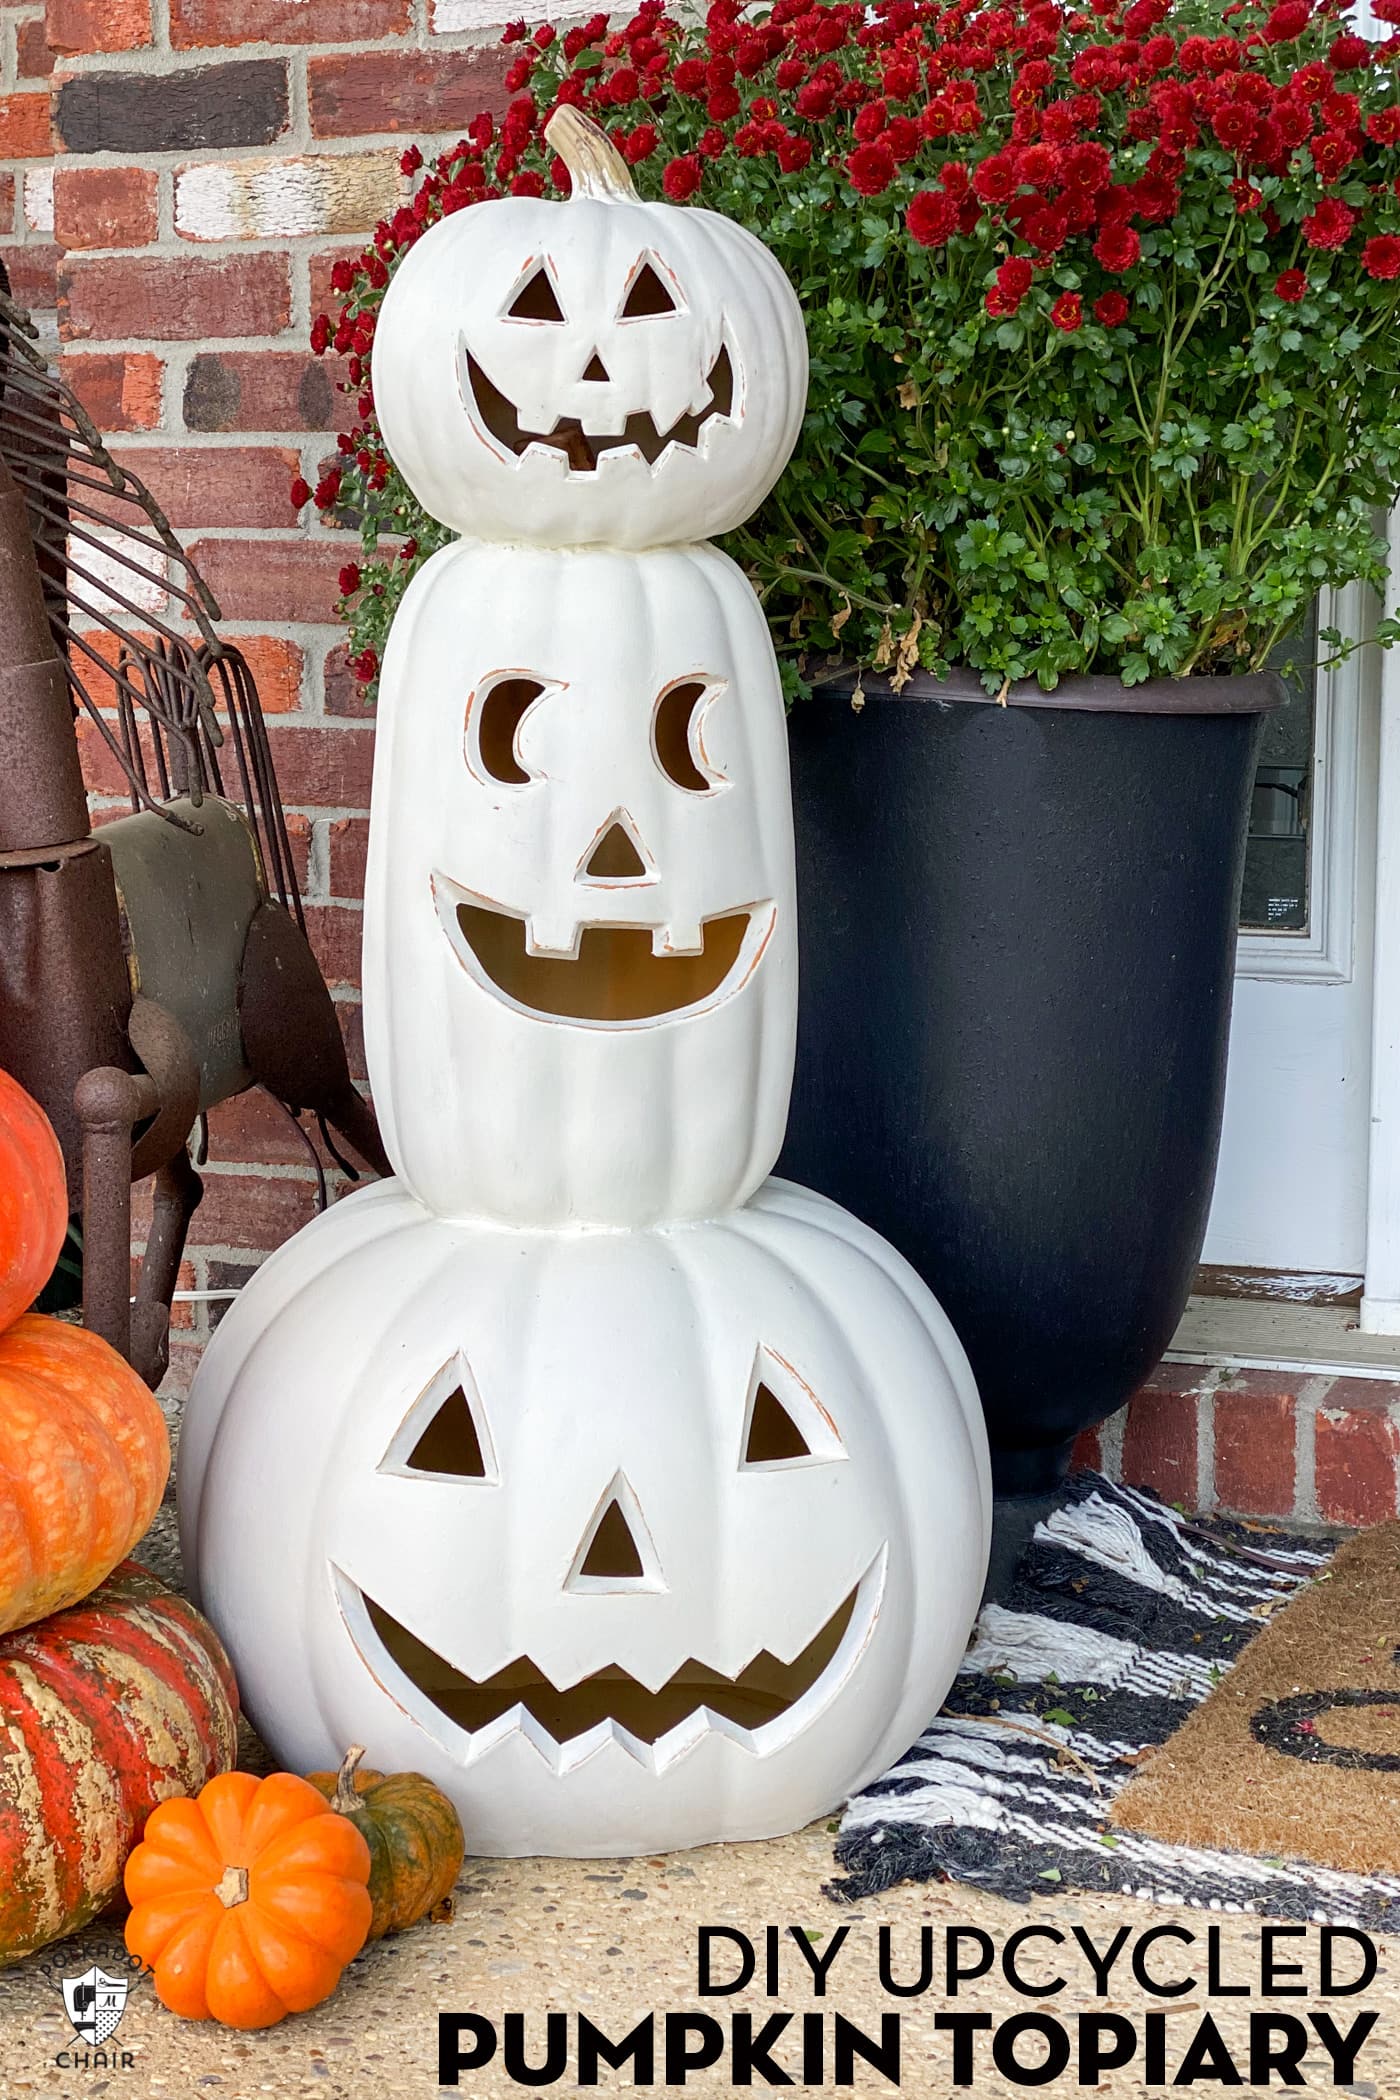 DIY Stacked Pumpkin Topiary with Upcycled Plastic Pumpkins